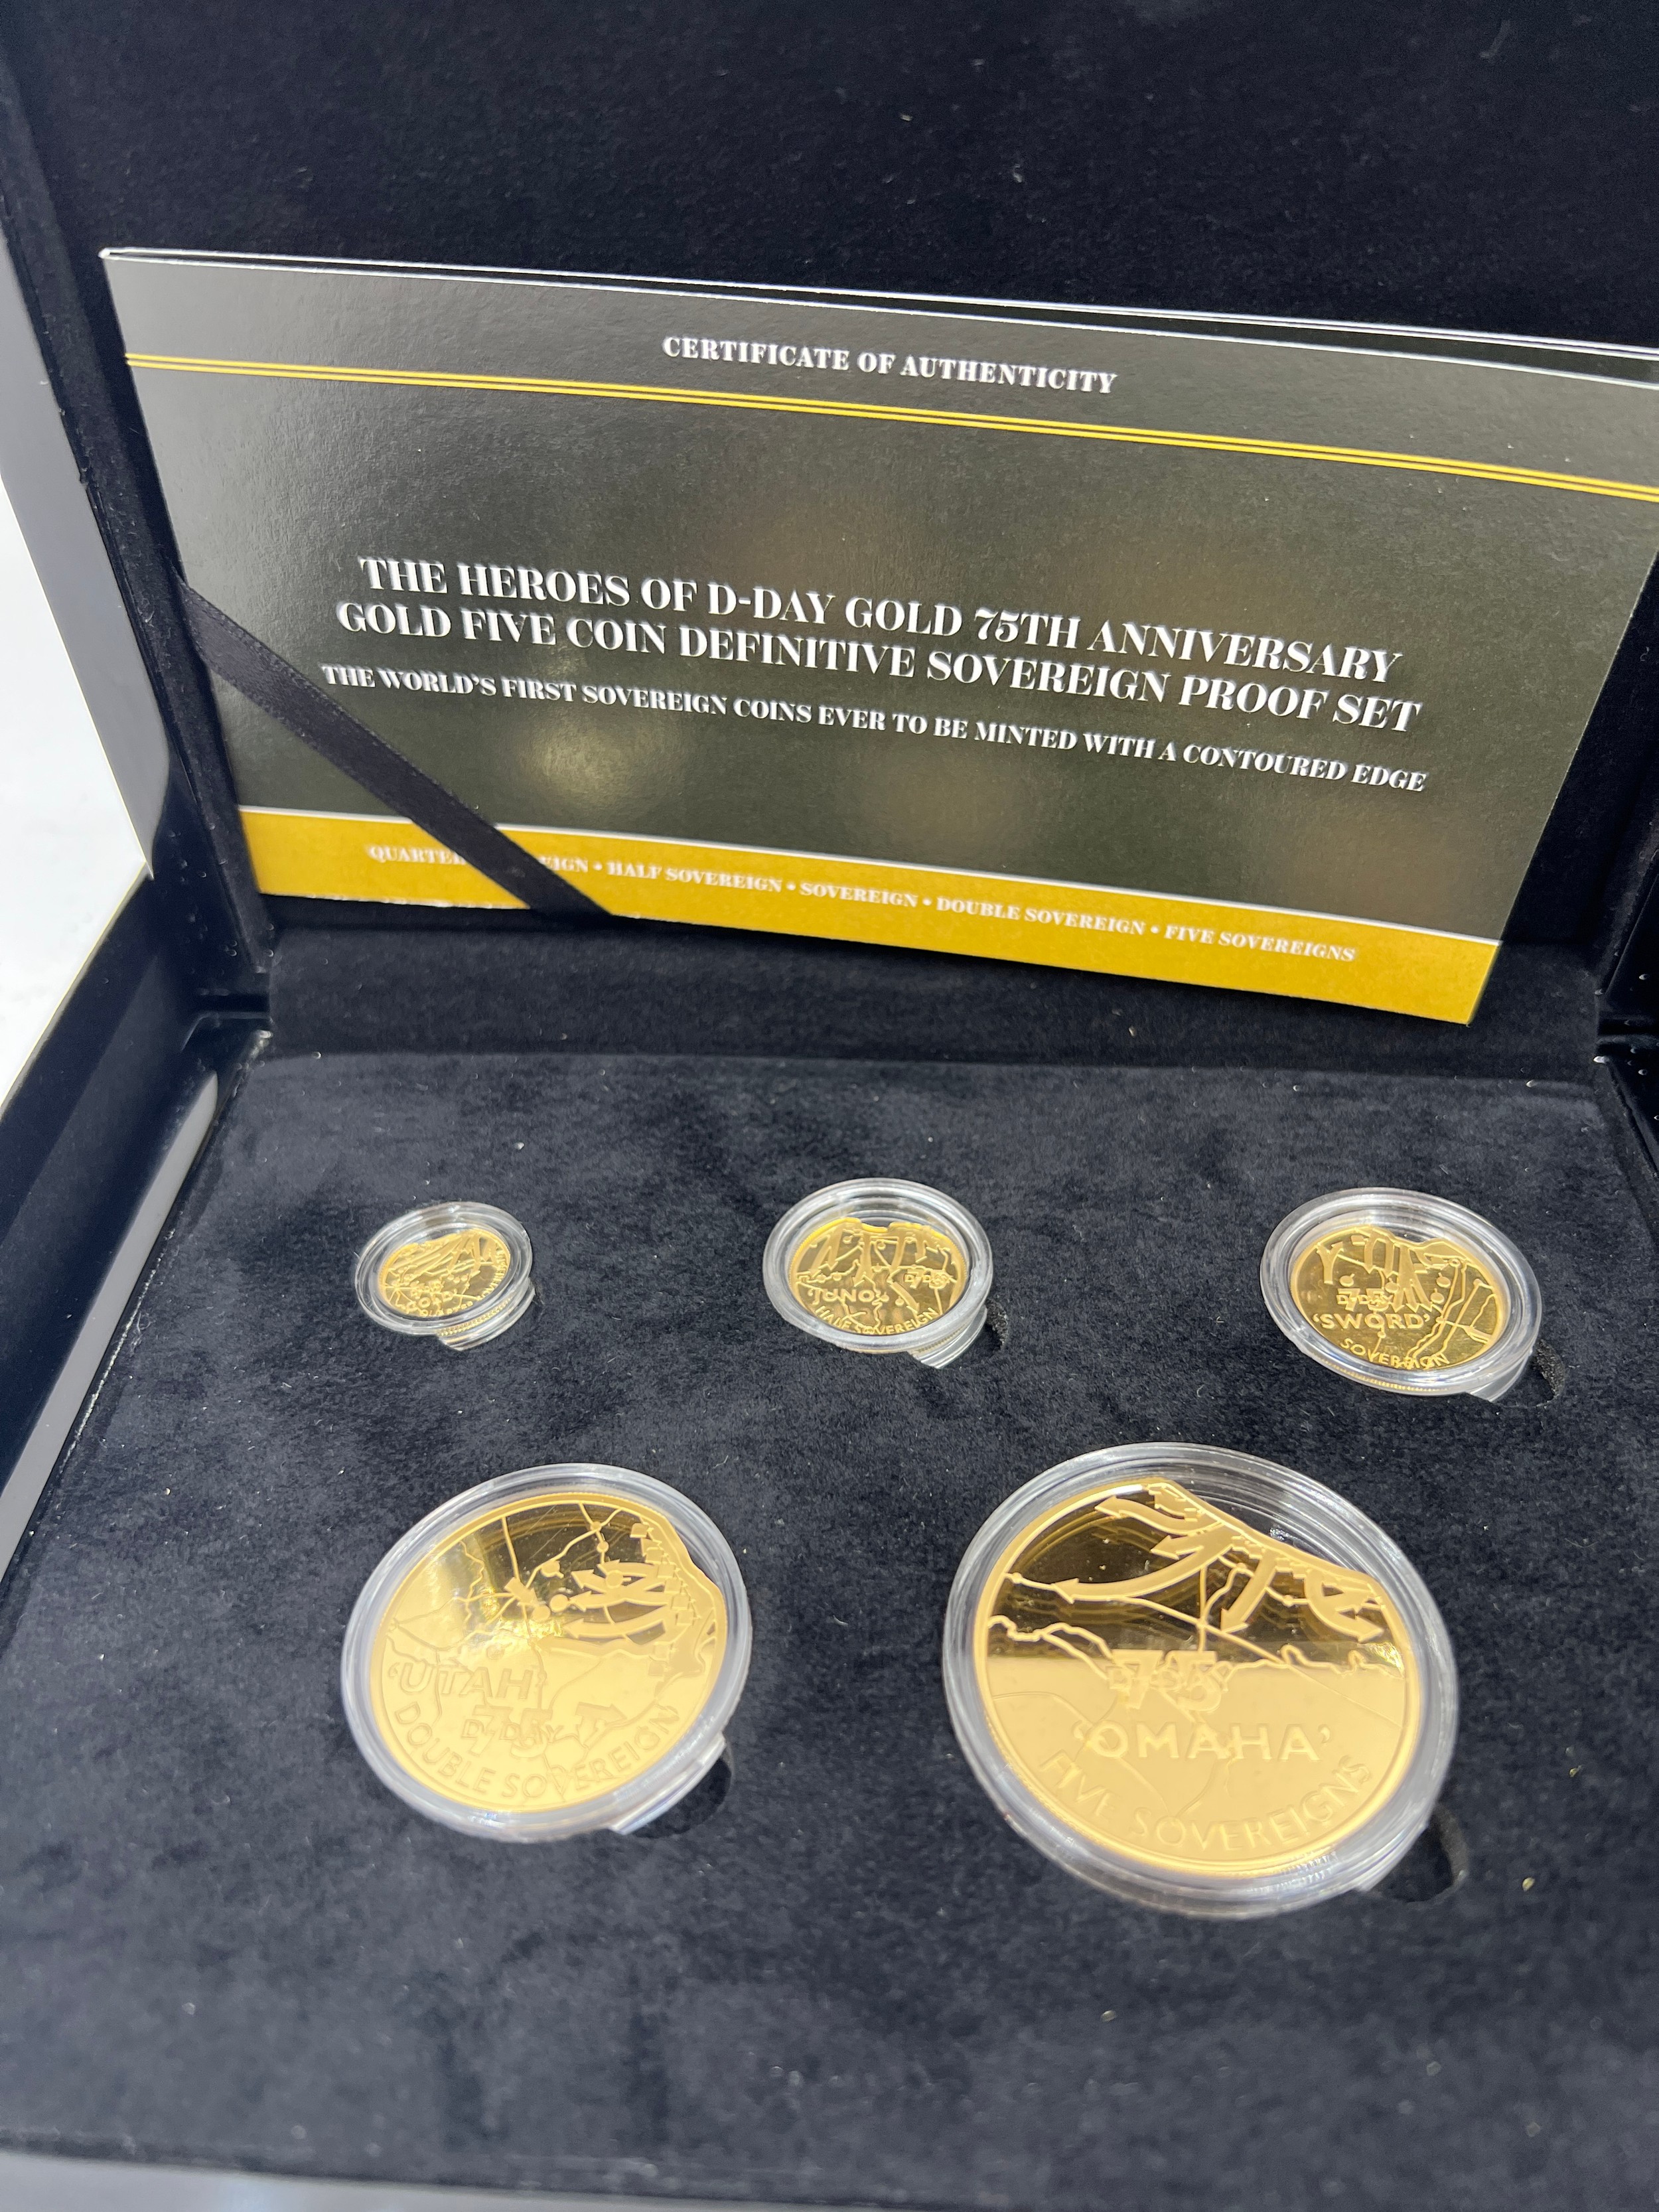 A cased set of gold coins by Hatton’s of London, The 2019 Heroes of D-Day 75th Anniversary Gold - Image 6 of 6